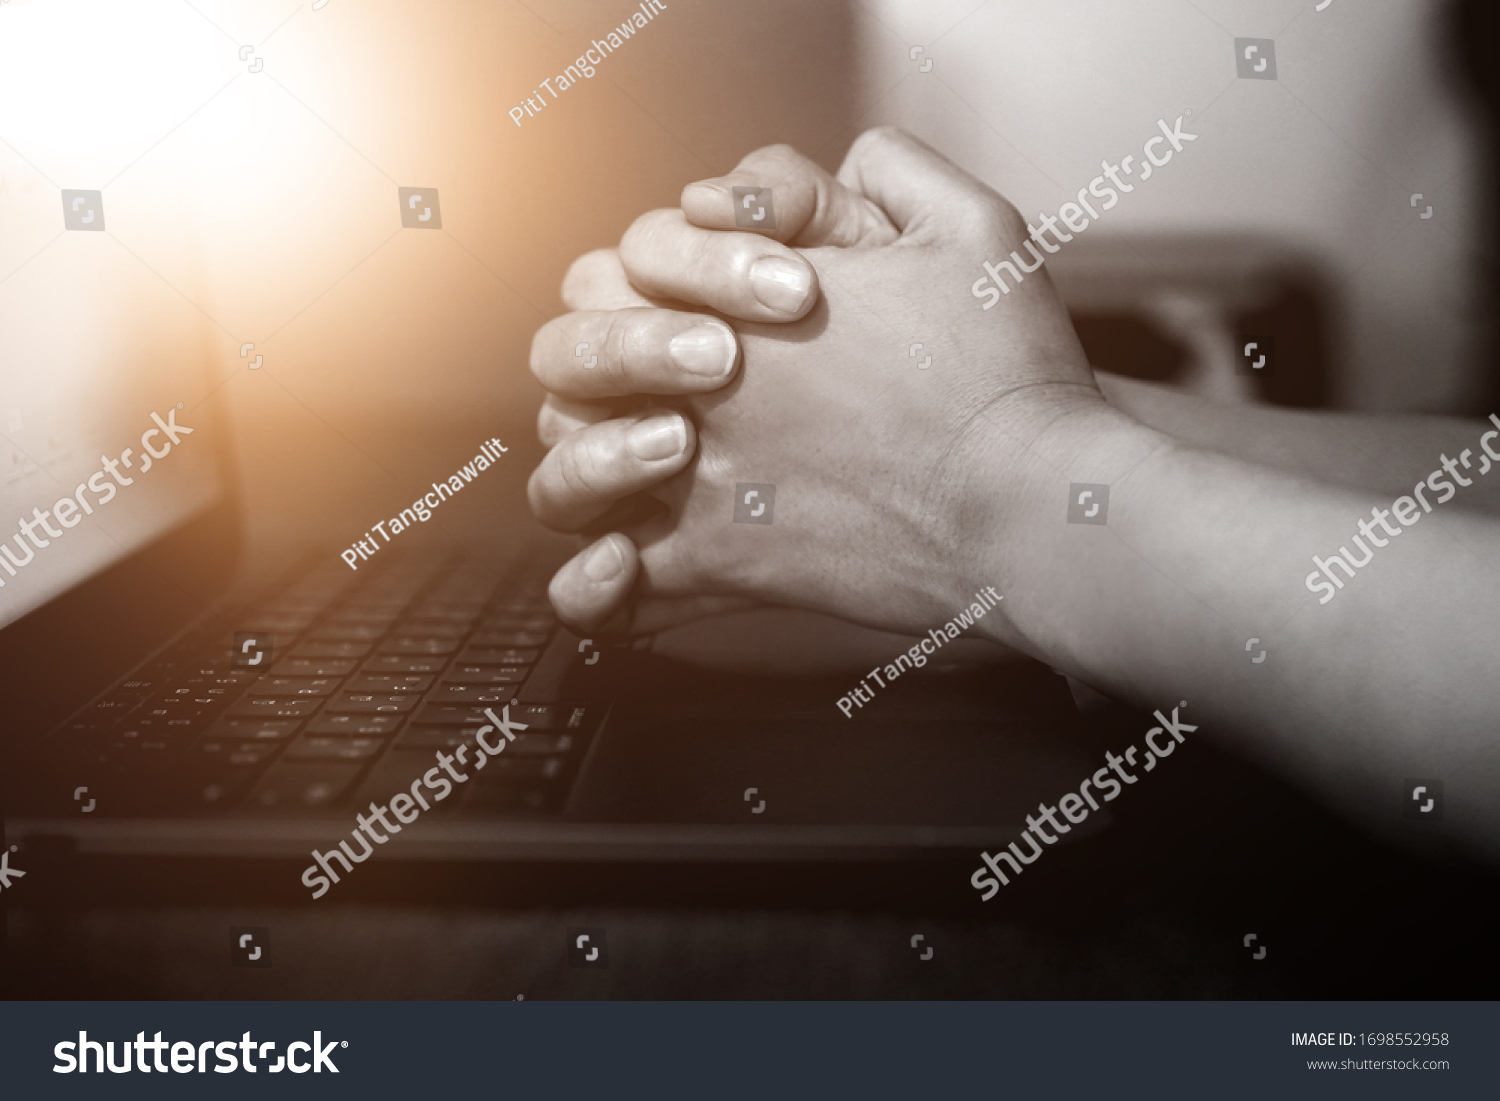 Hand praying with laptop, Church online Sunday services concept, Home church during quarantine coronavirus Covid-19, Hands folded in prayer concept for faith.